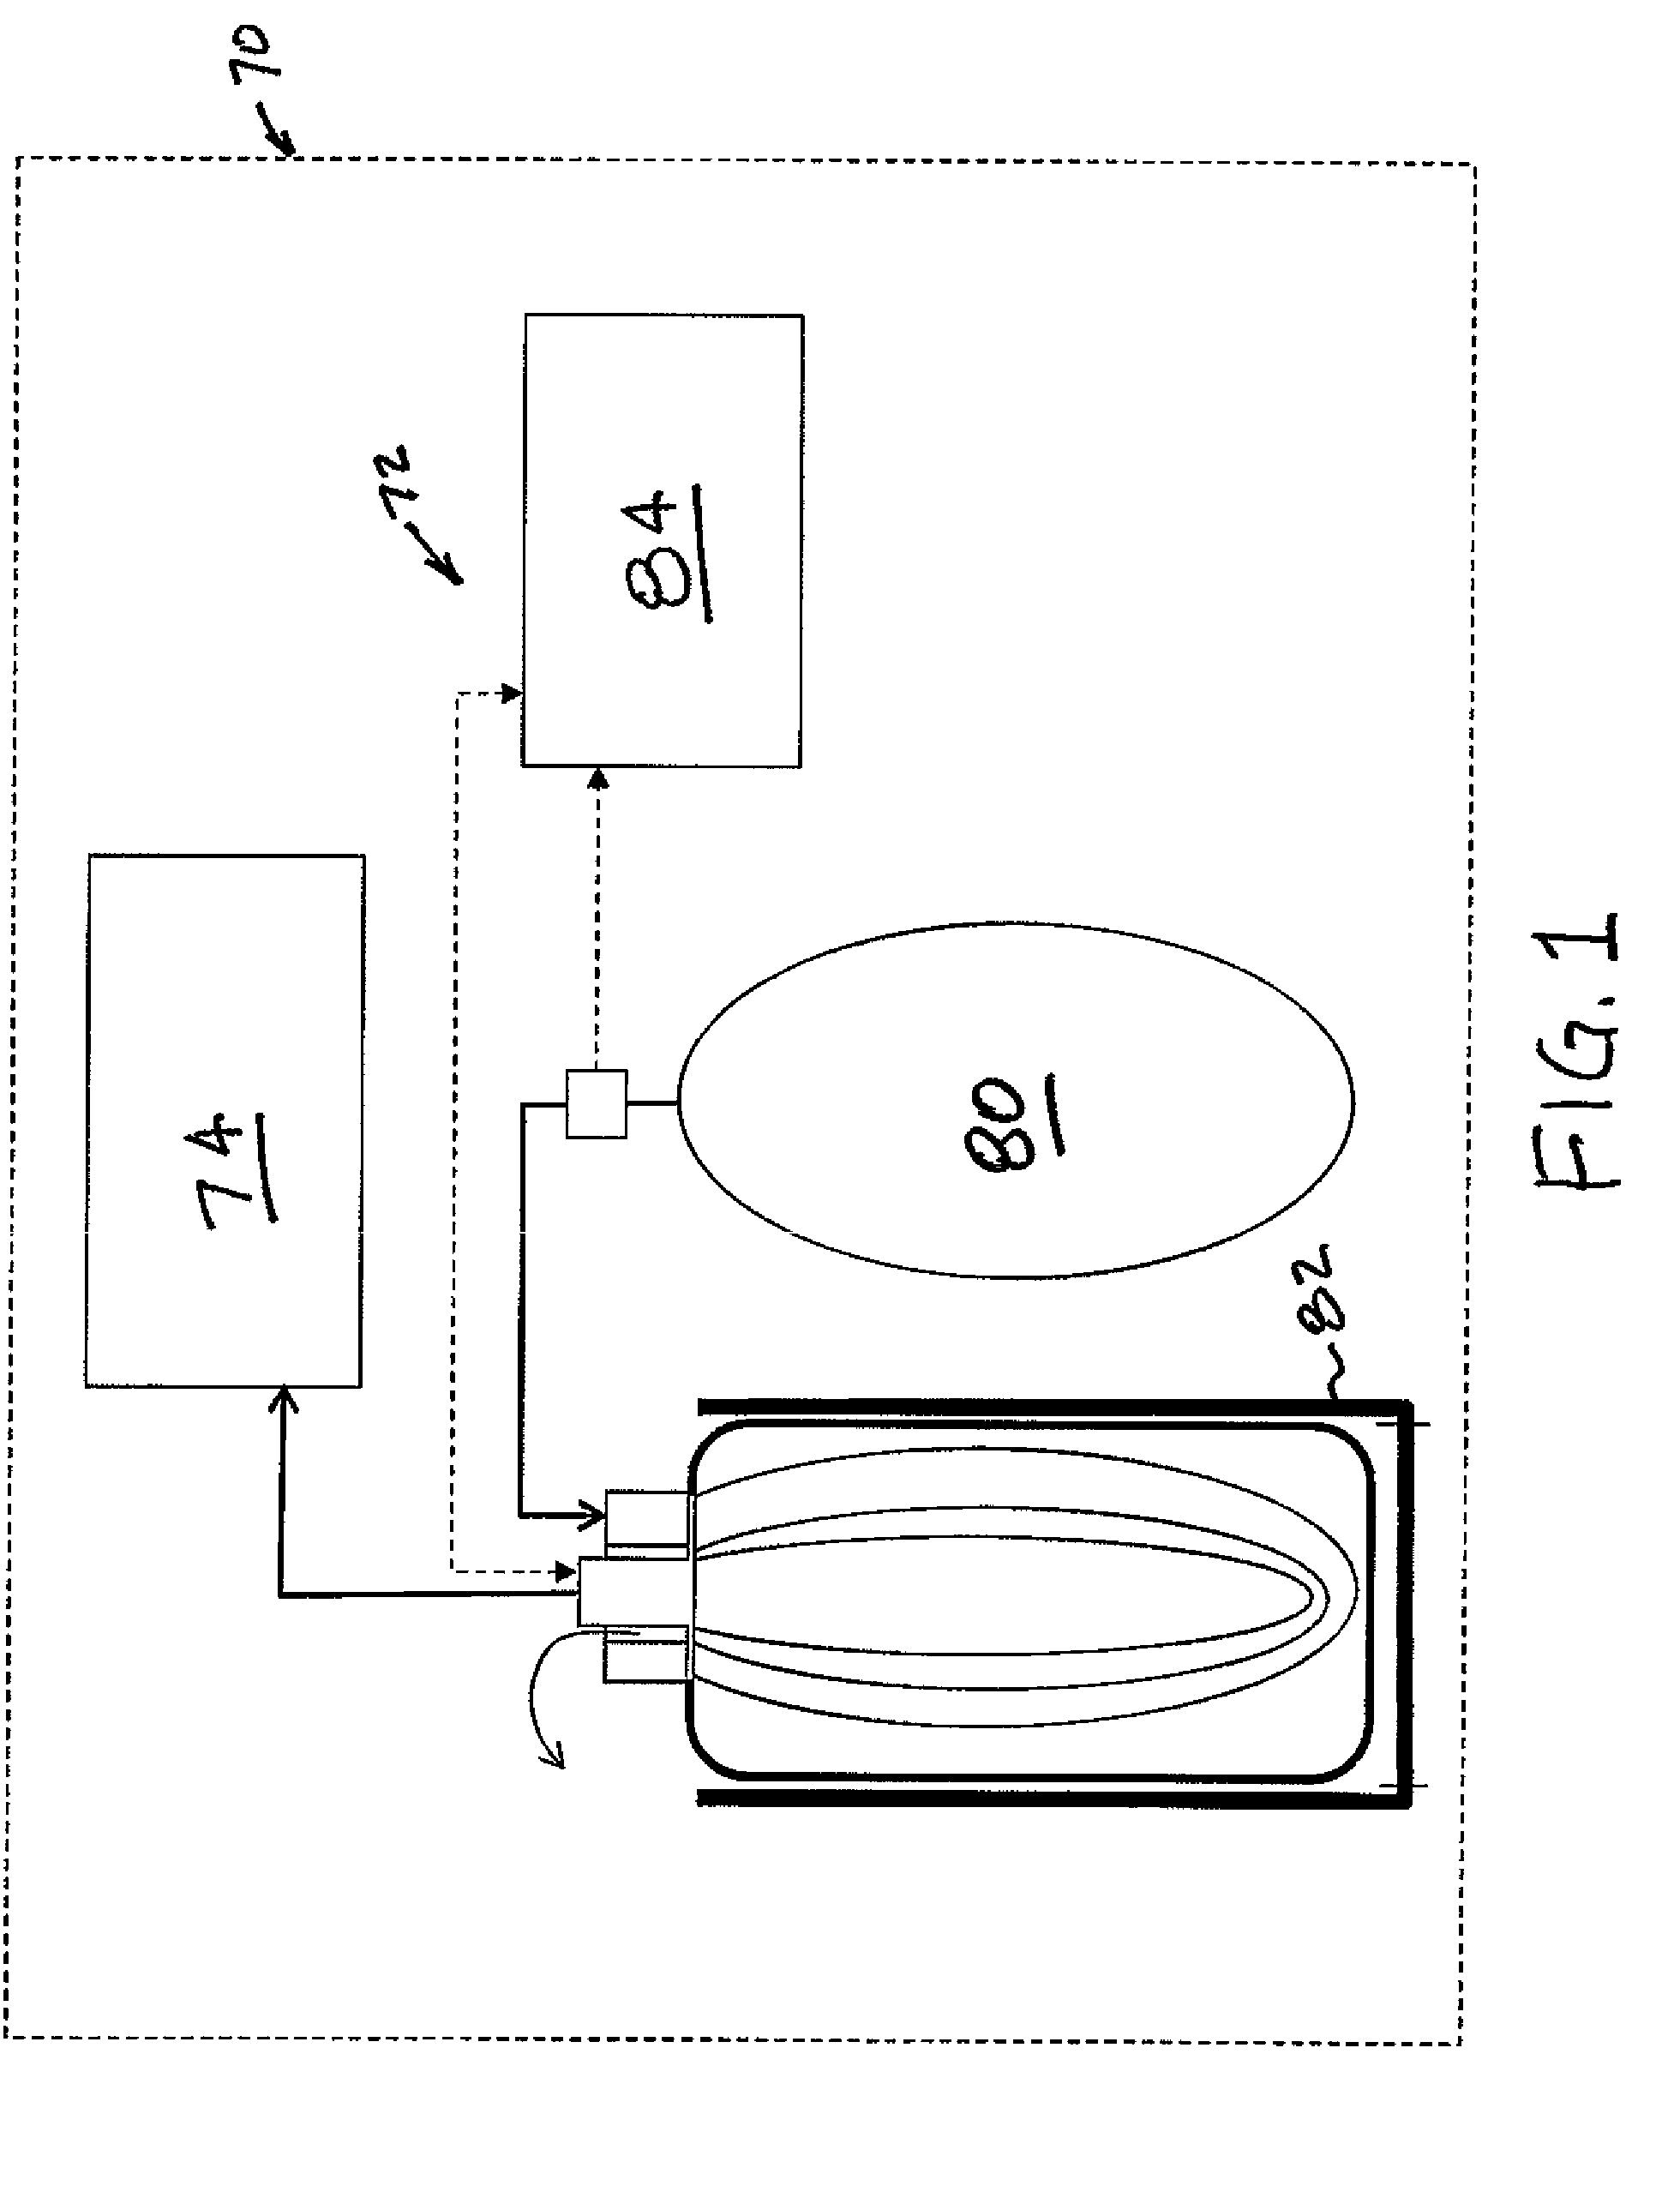 Method and apparatus for dispensing fluids